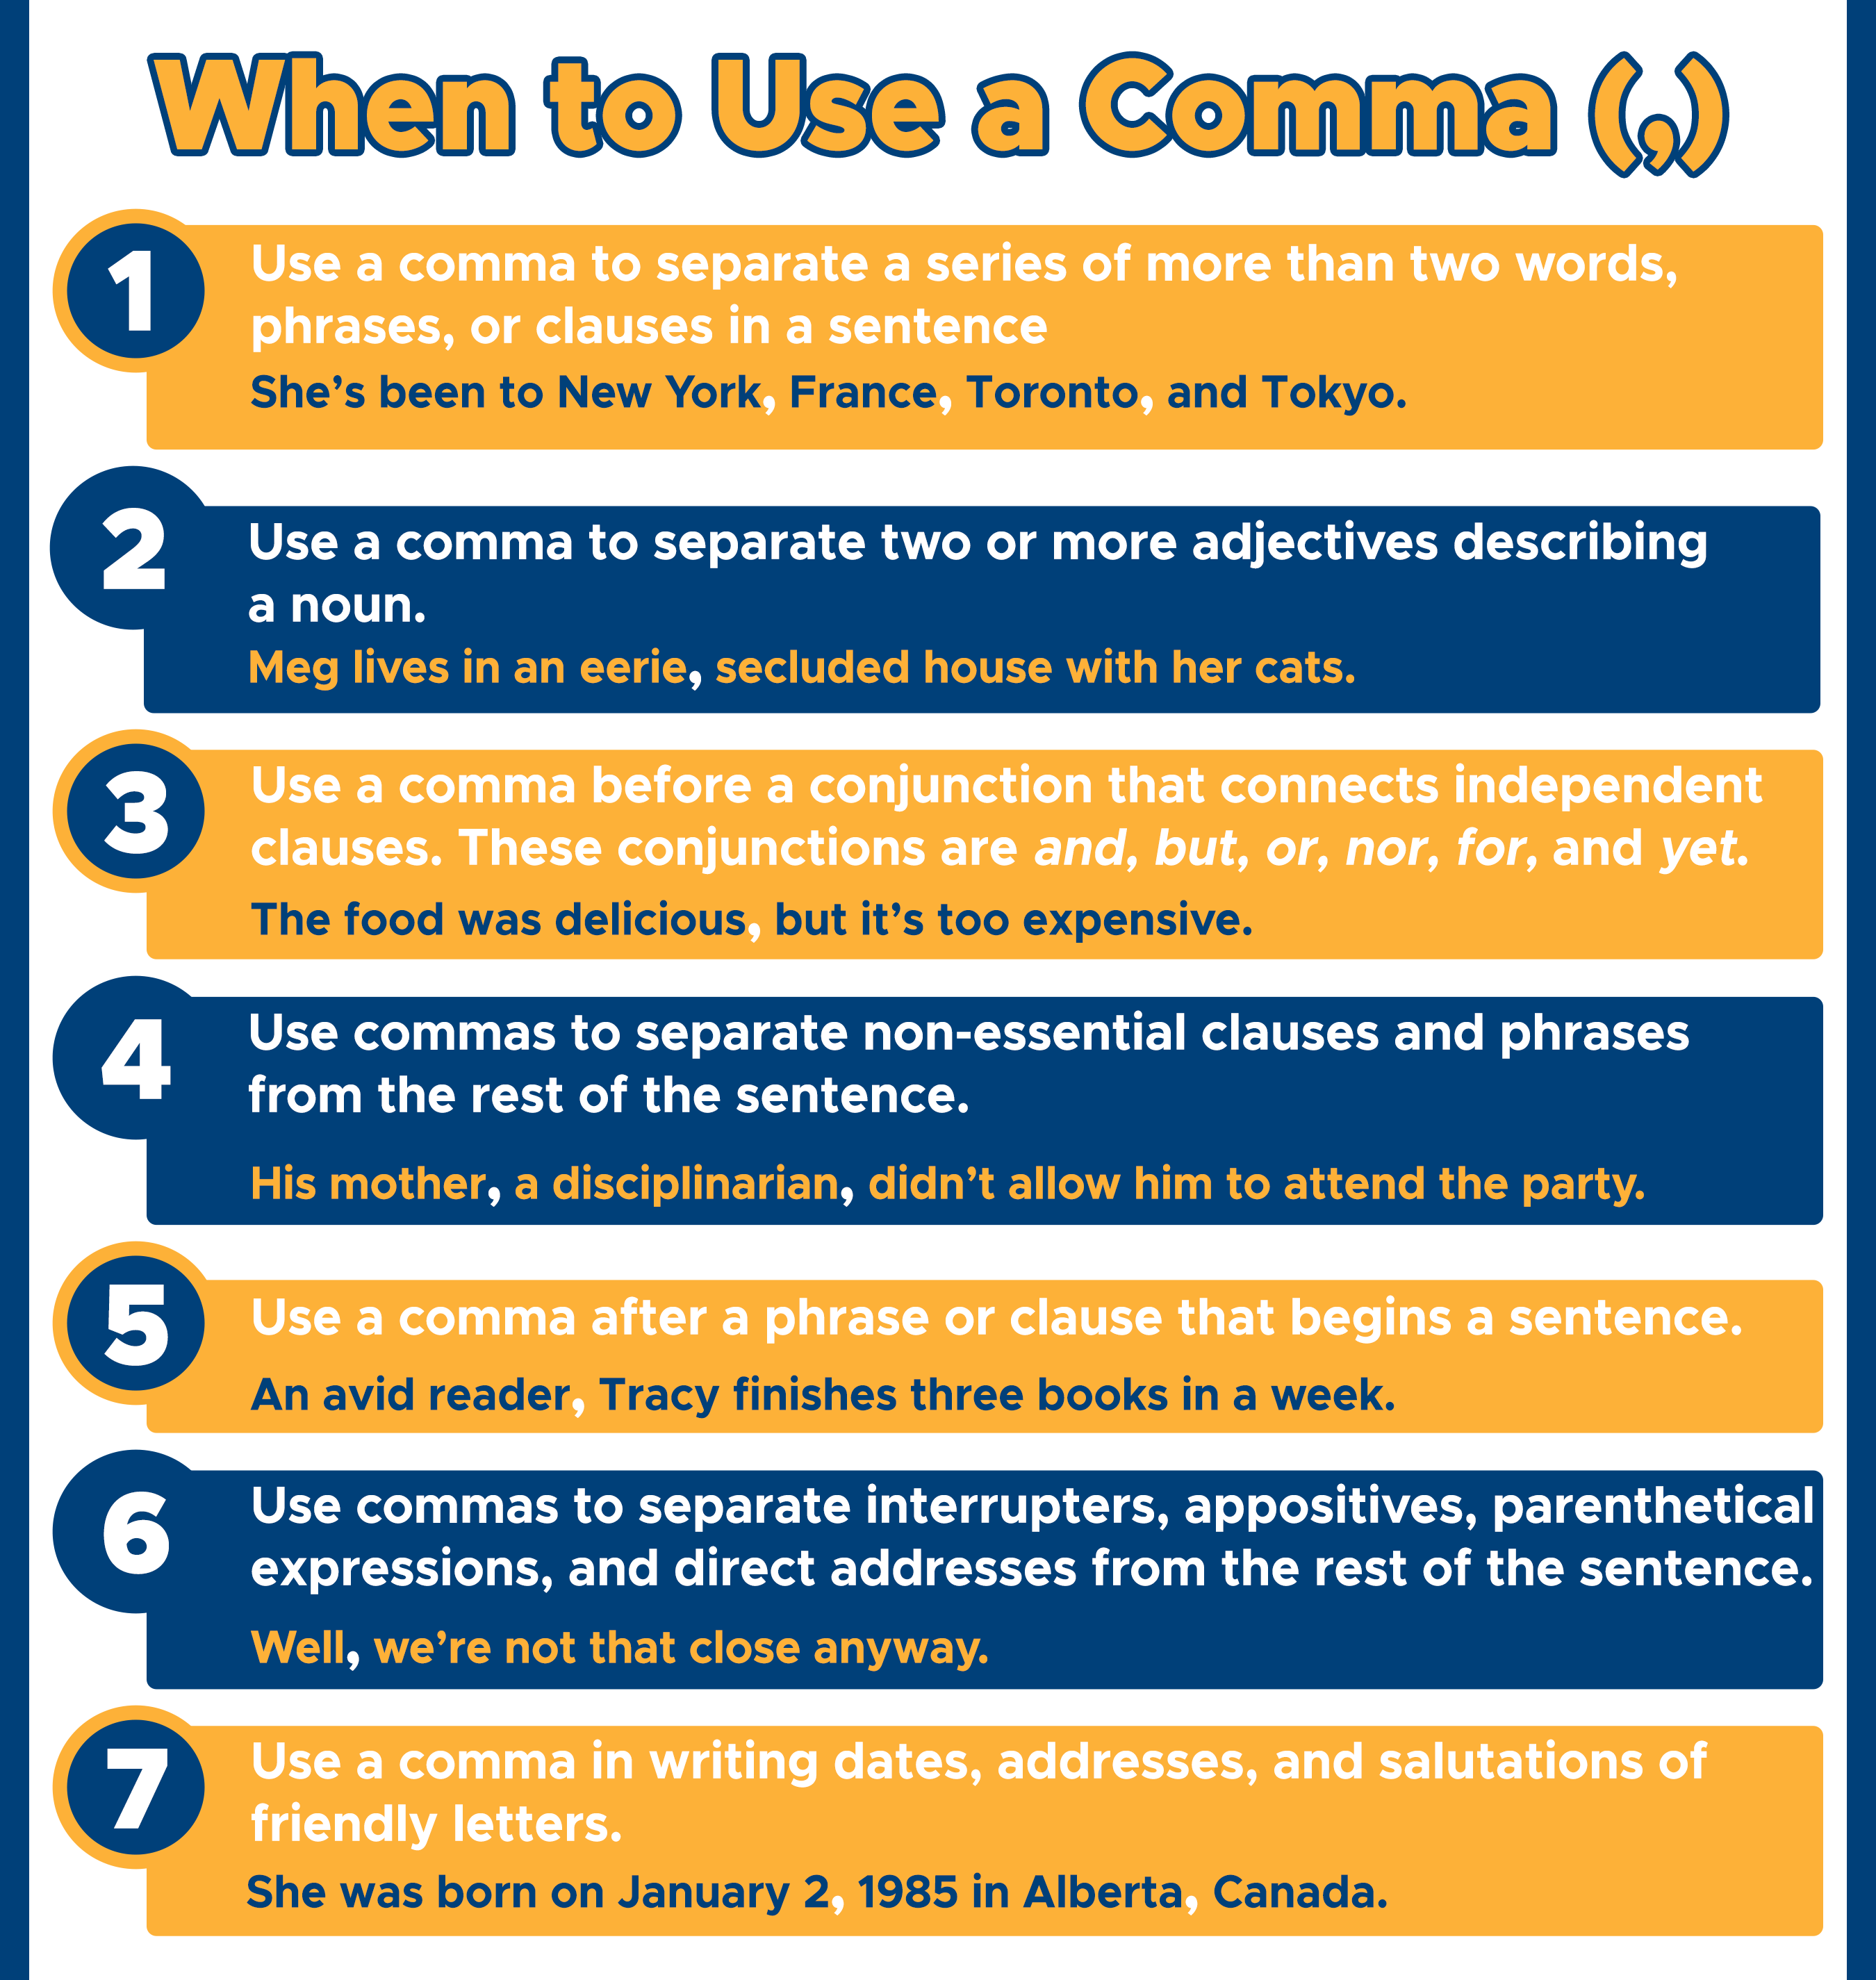 When to use a comma (,)